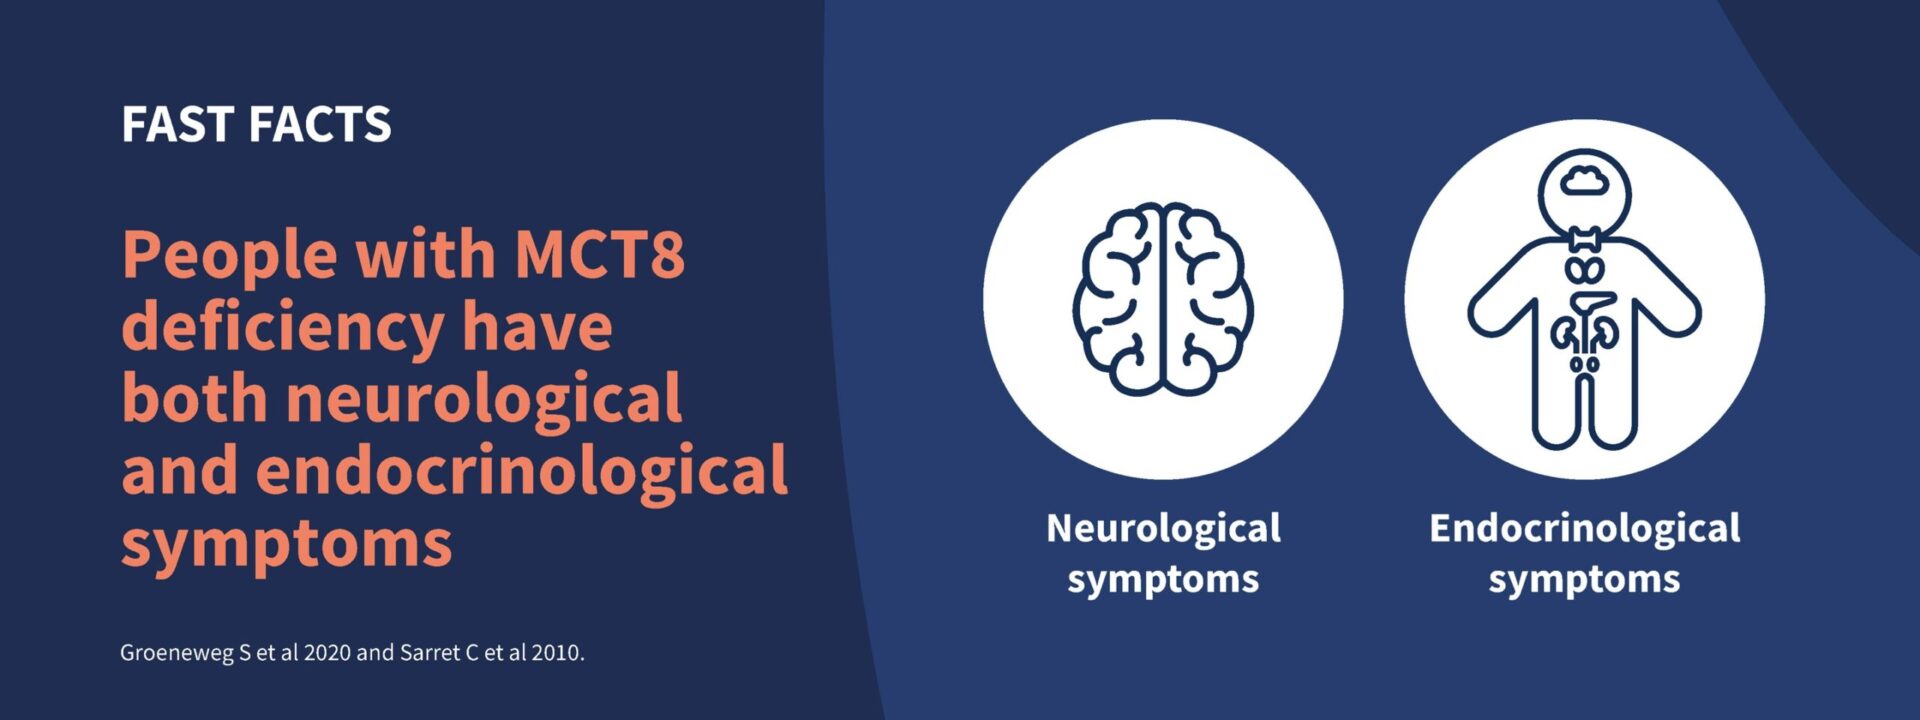 People with MCT8 deficiency have both neurological and endocrinological symptoms